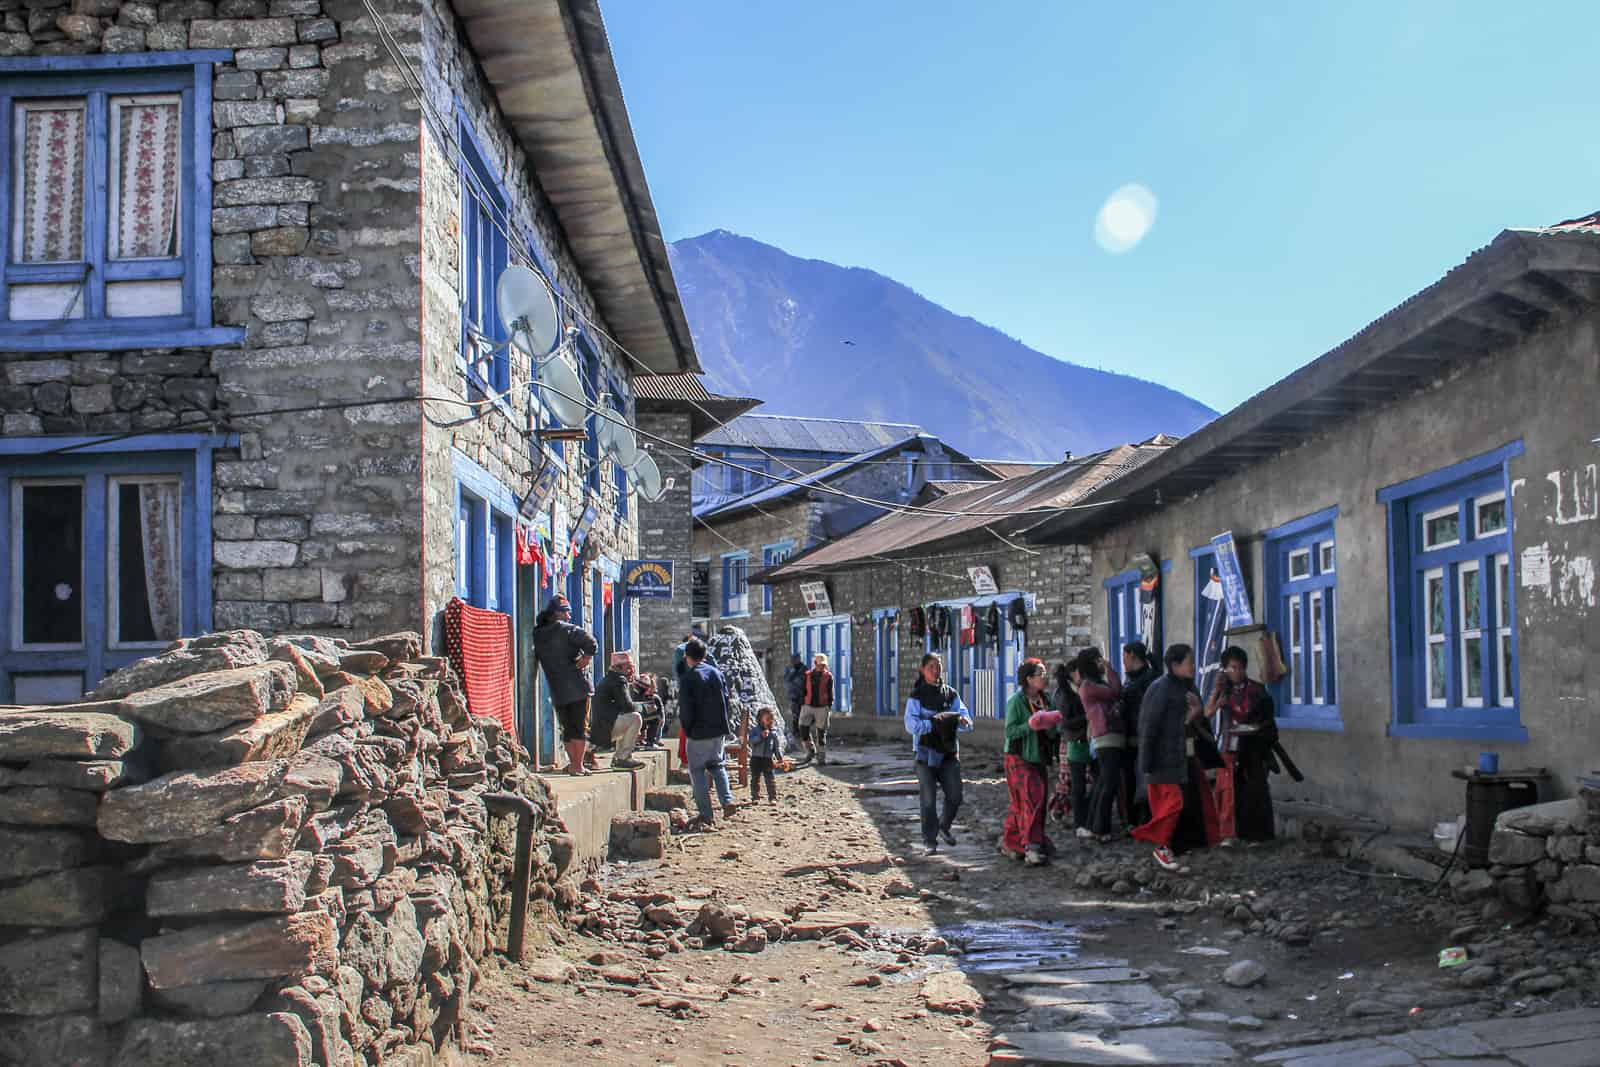 The sandy toned streets and houses with blue window frames in the Nepal town of Lukla in the Himalaya moumntains